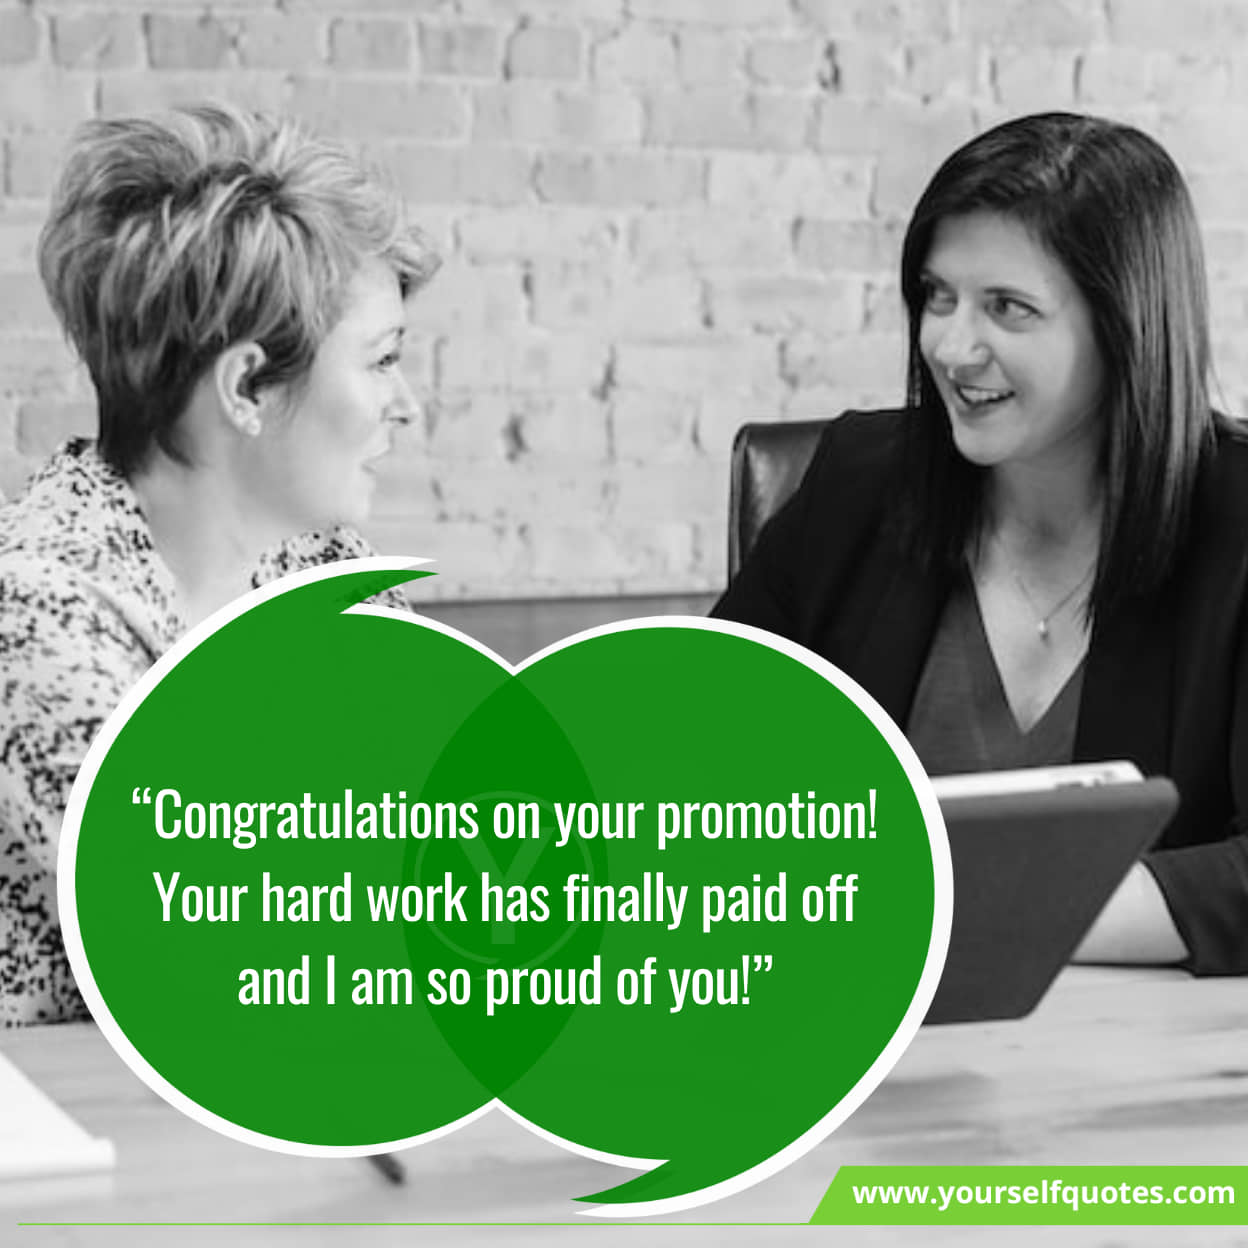 Congratulations Messages To Boss Promotion To Appreciate - Immense ...